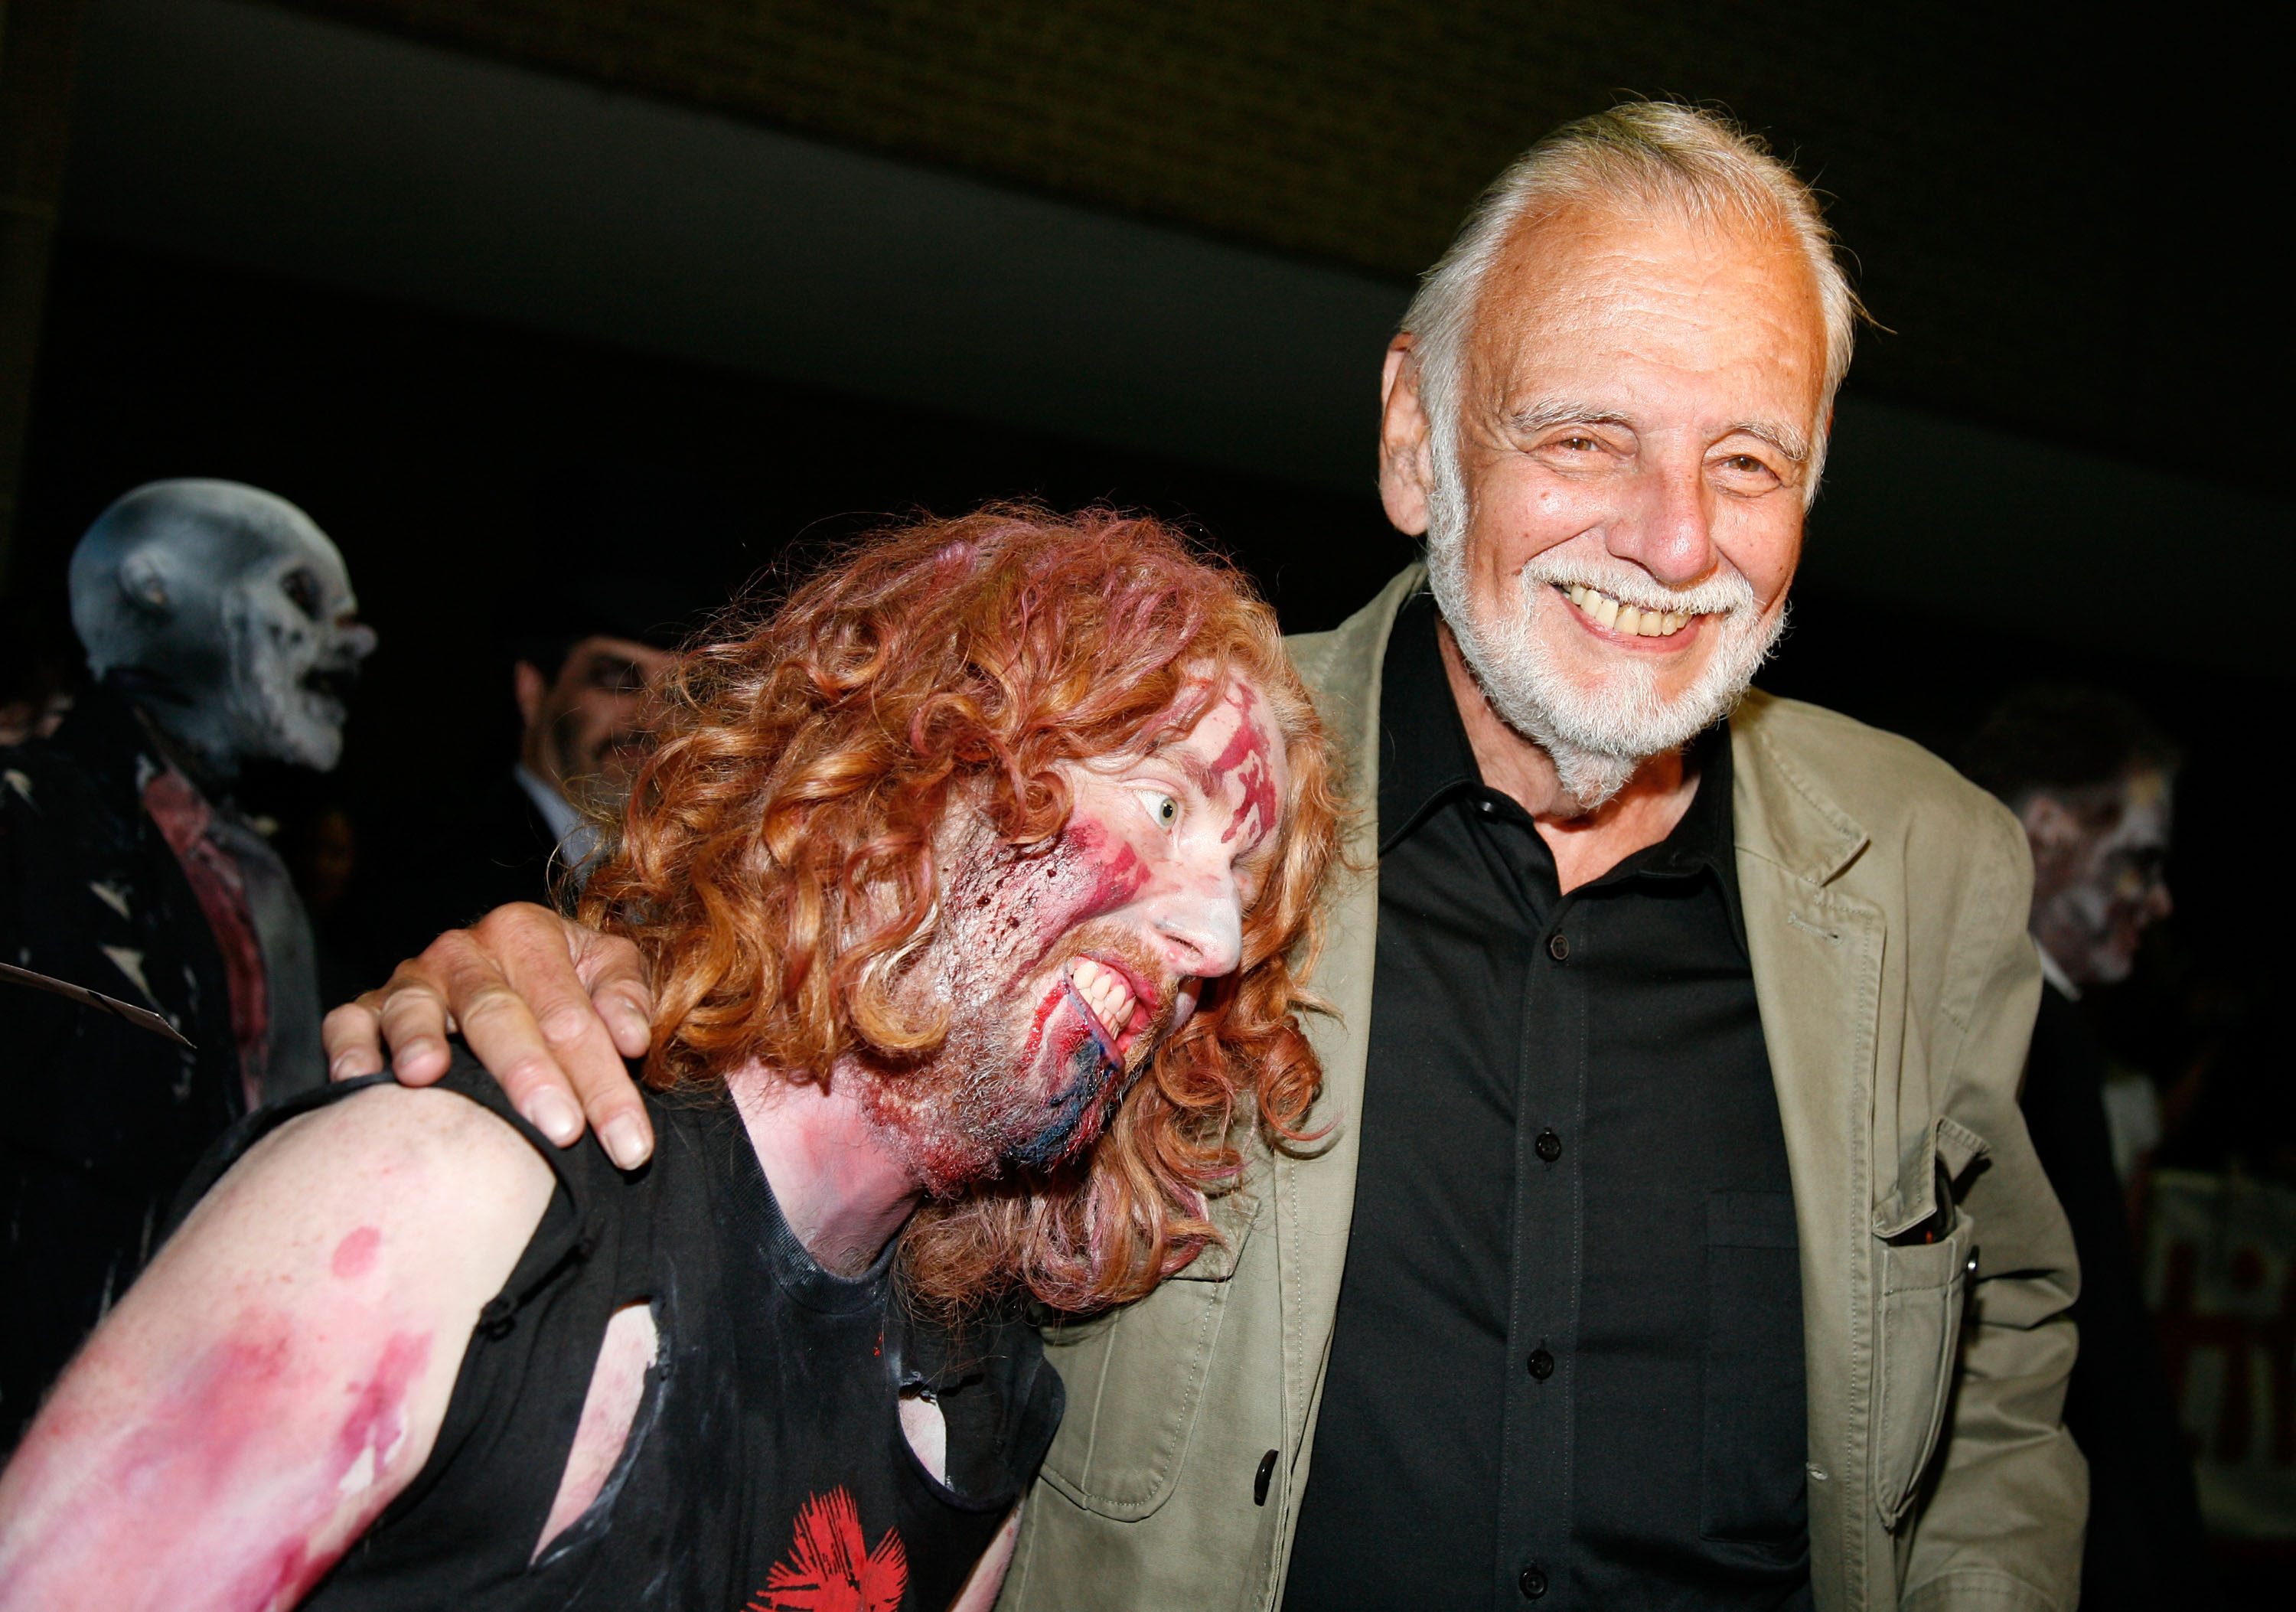 Night Of The Living Dead' Creator George A. Romero Is Also Dead